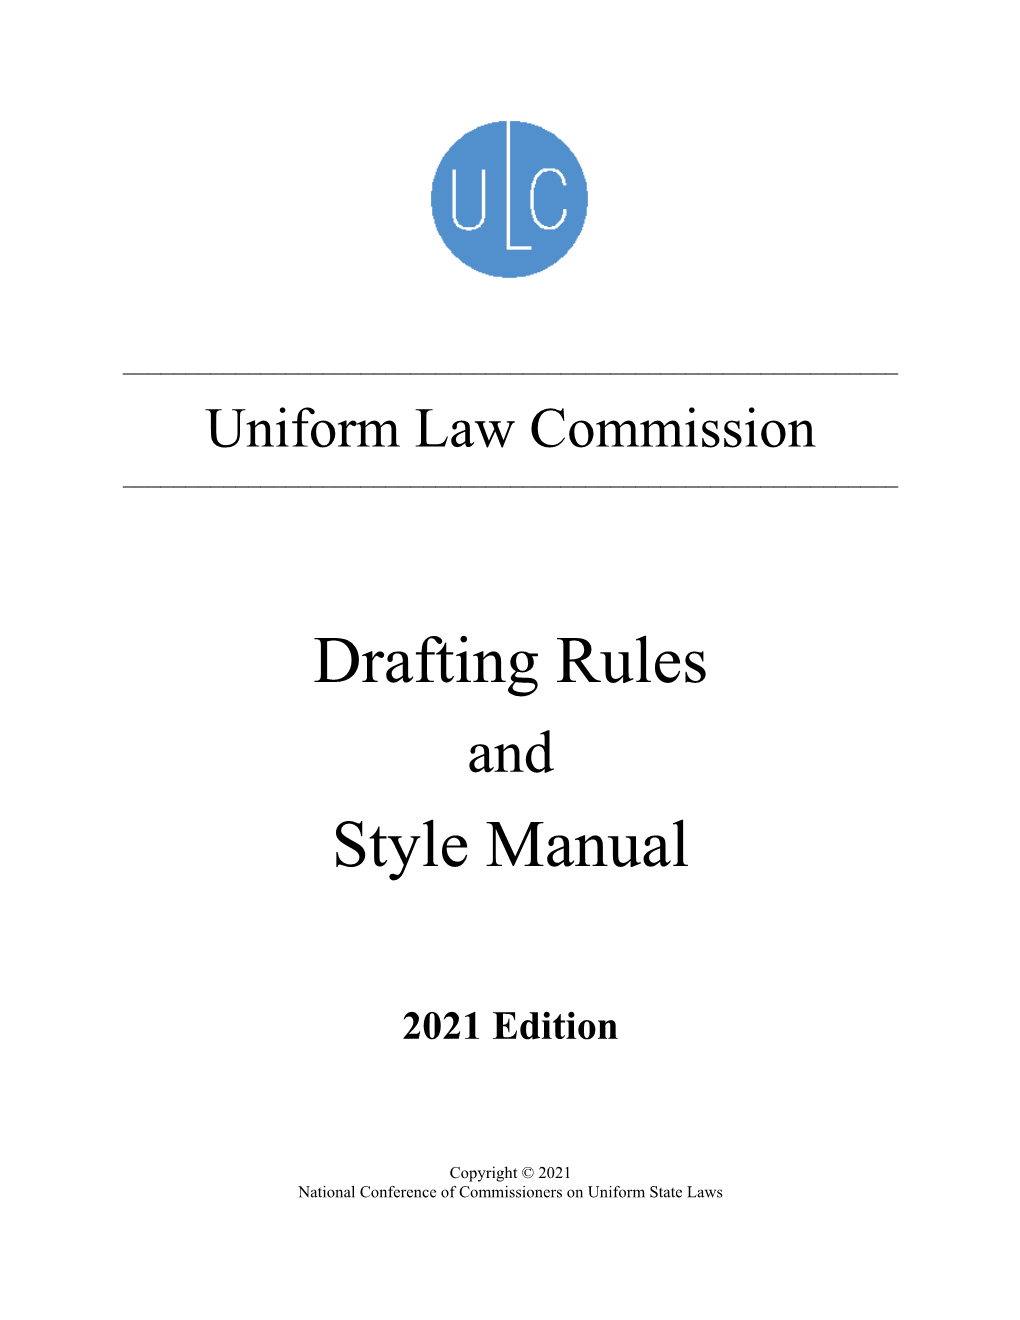 Downloaded Here, Obtained from the ULC Office, Or Downloaded from the Style Committee Page of the ULC Website